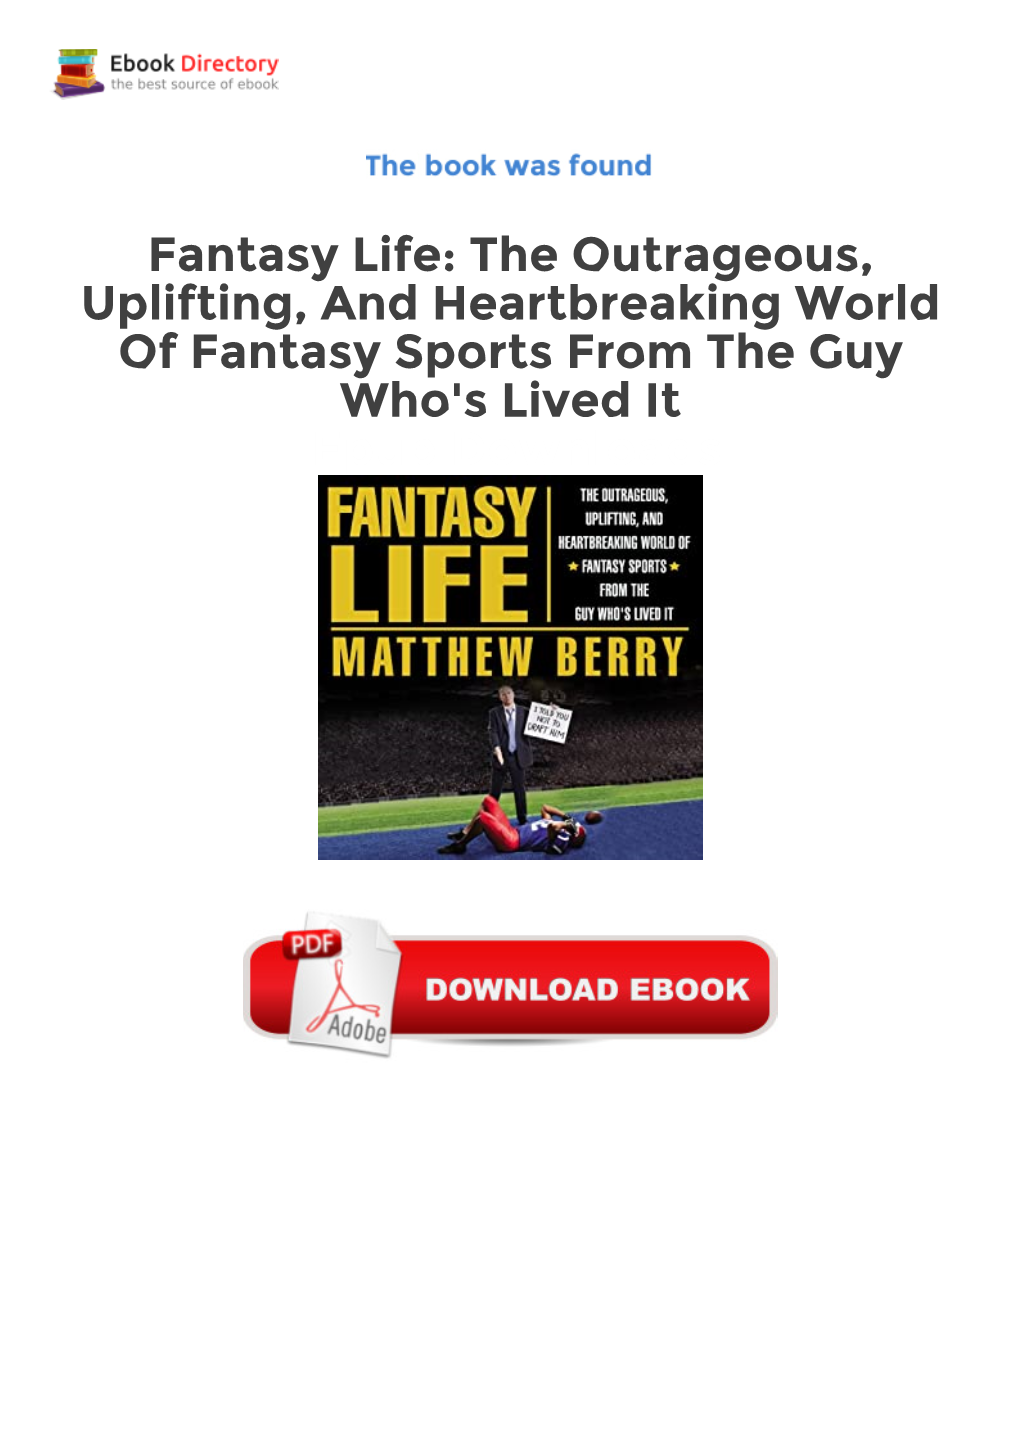 Fantasy Life: the Outrageous, Uplifting, and Heartbreaking World Of